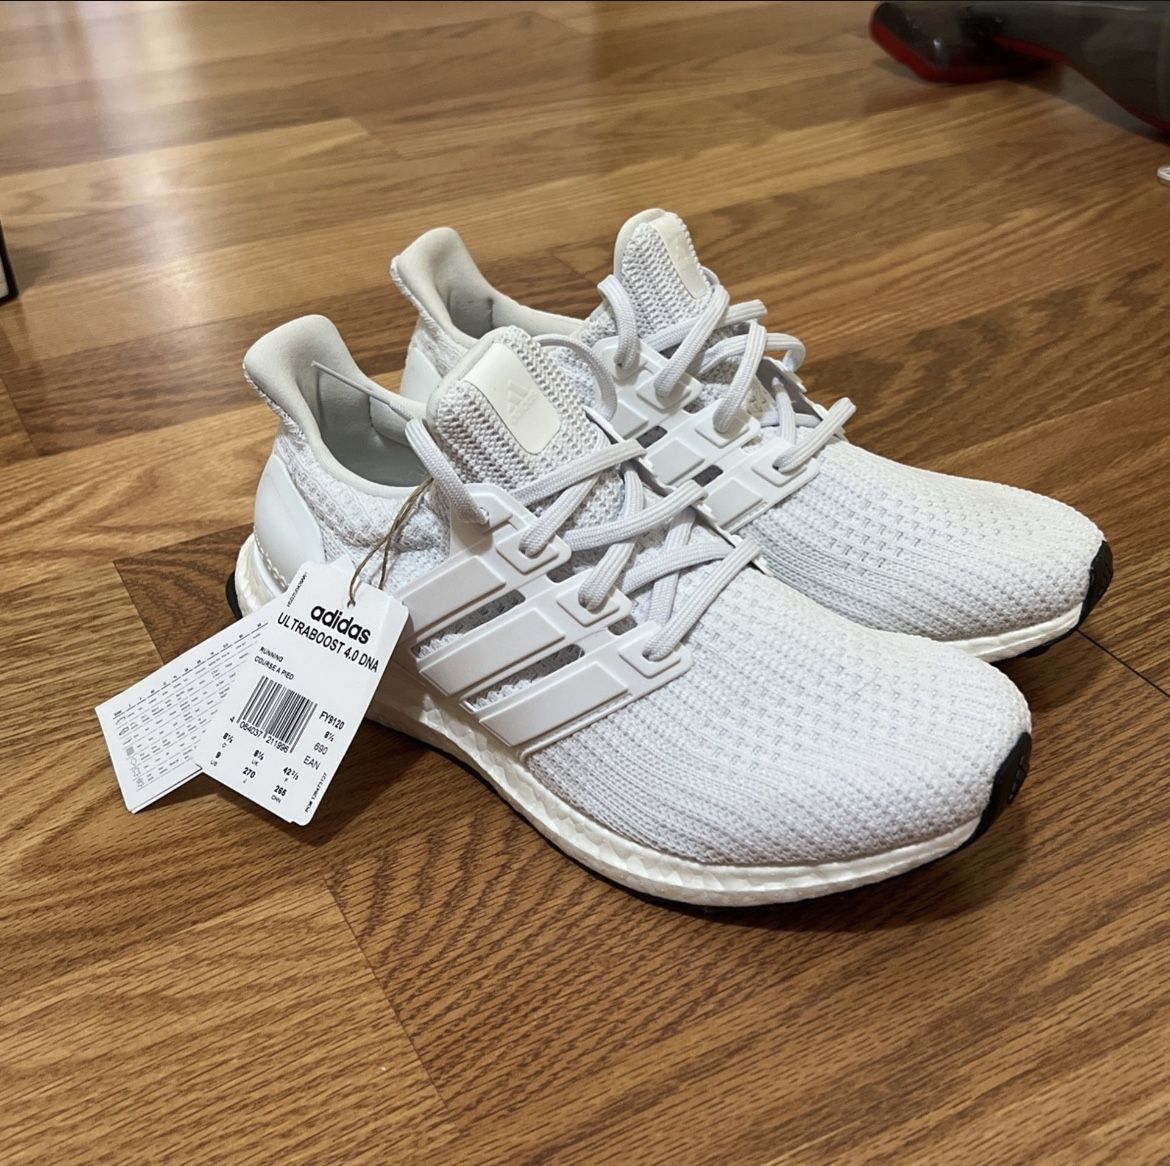 White Adidas Ultra Boost Size 9